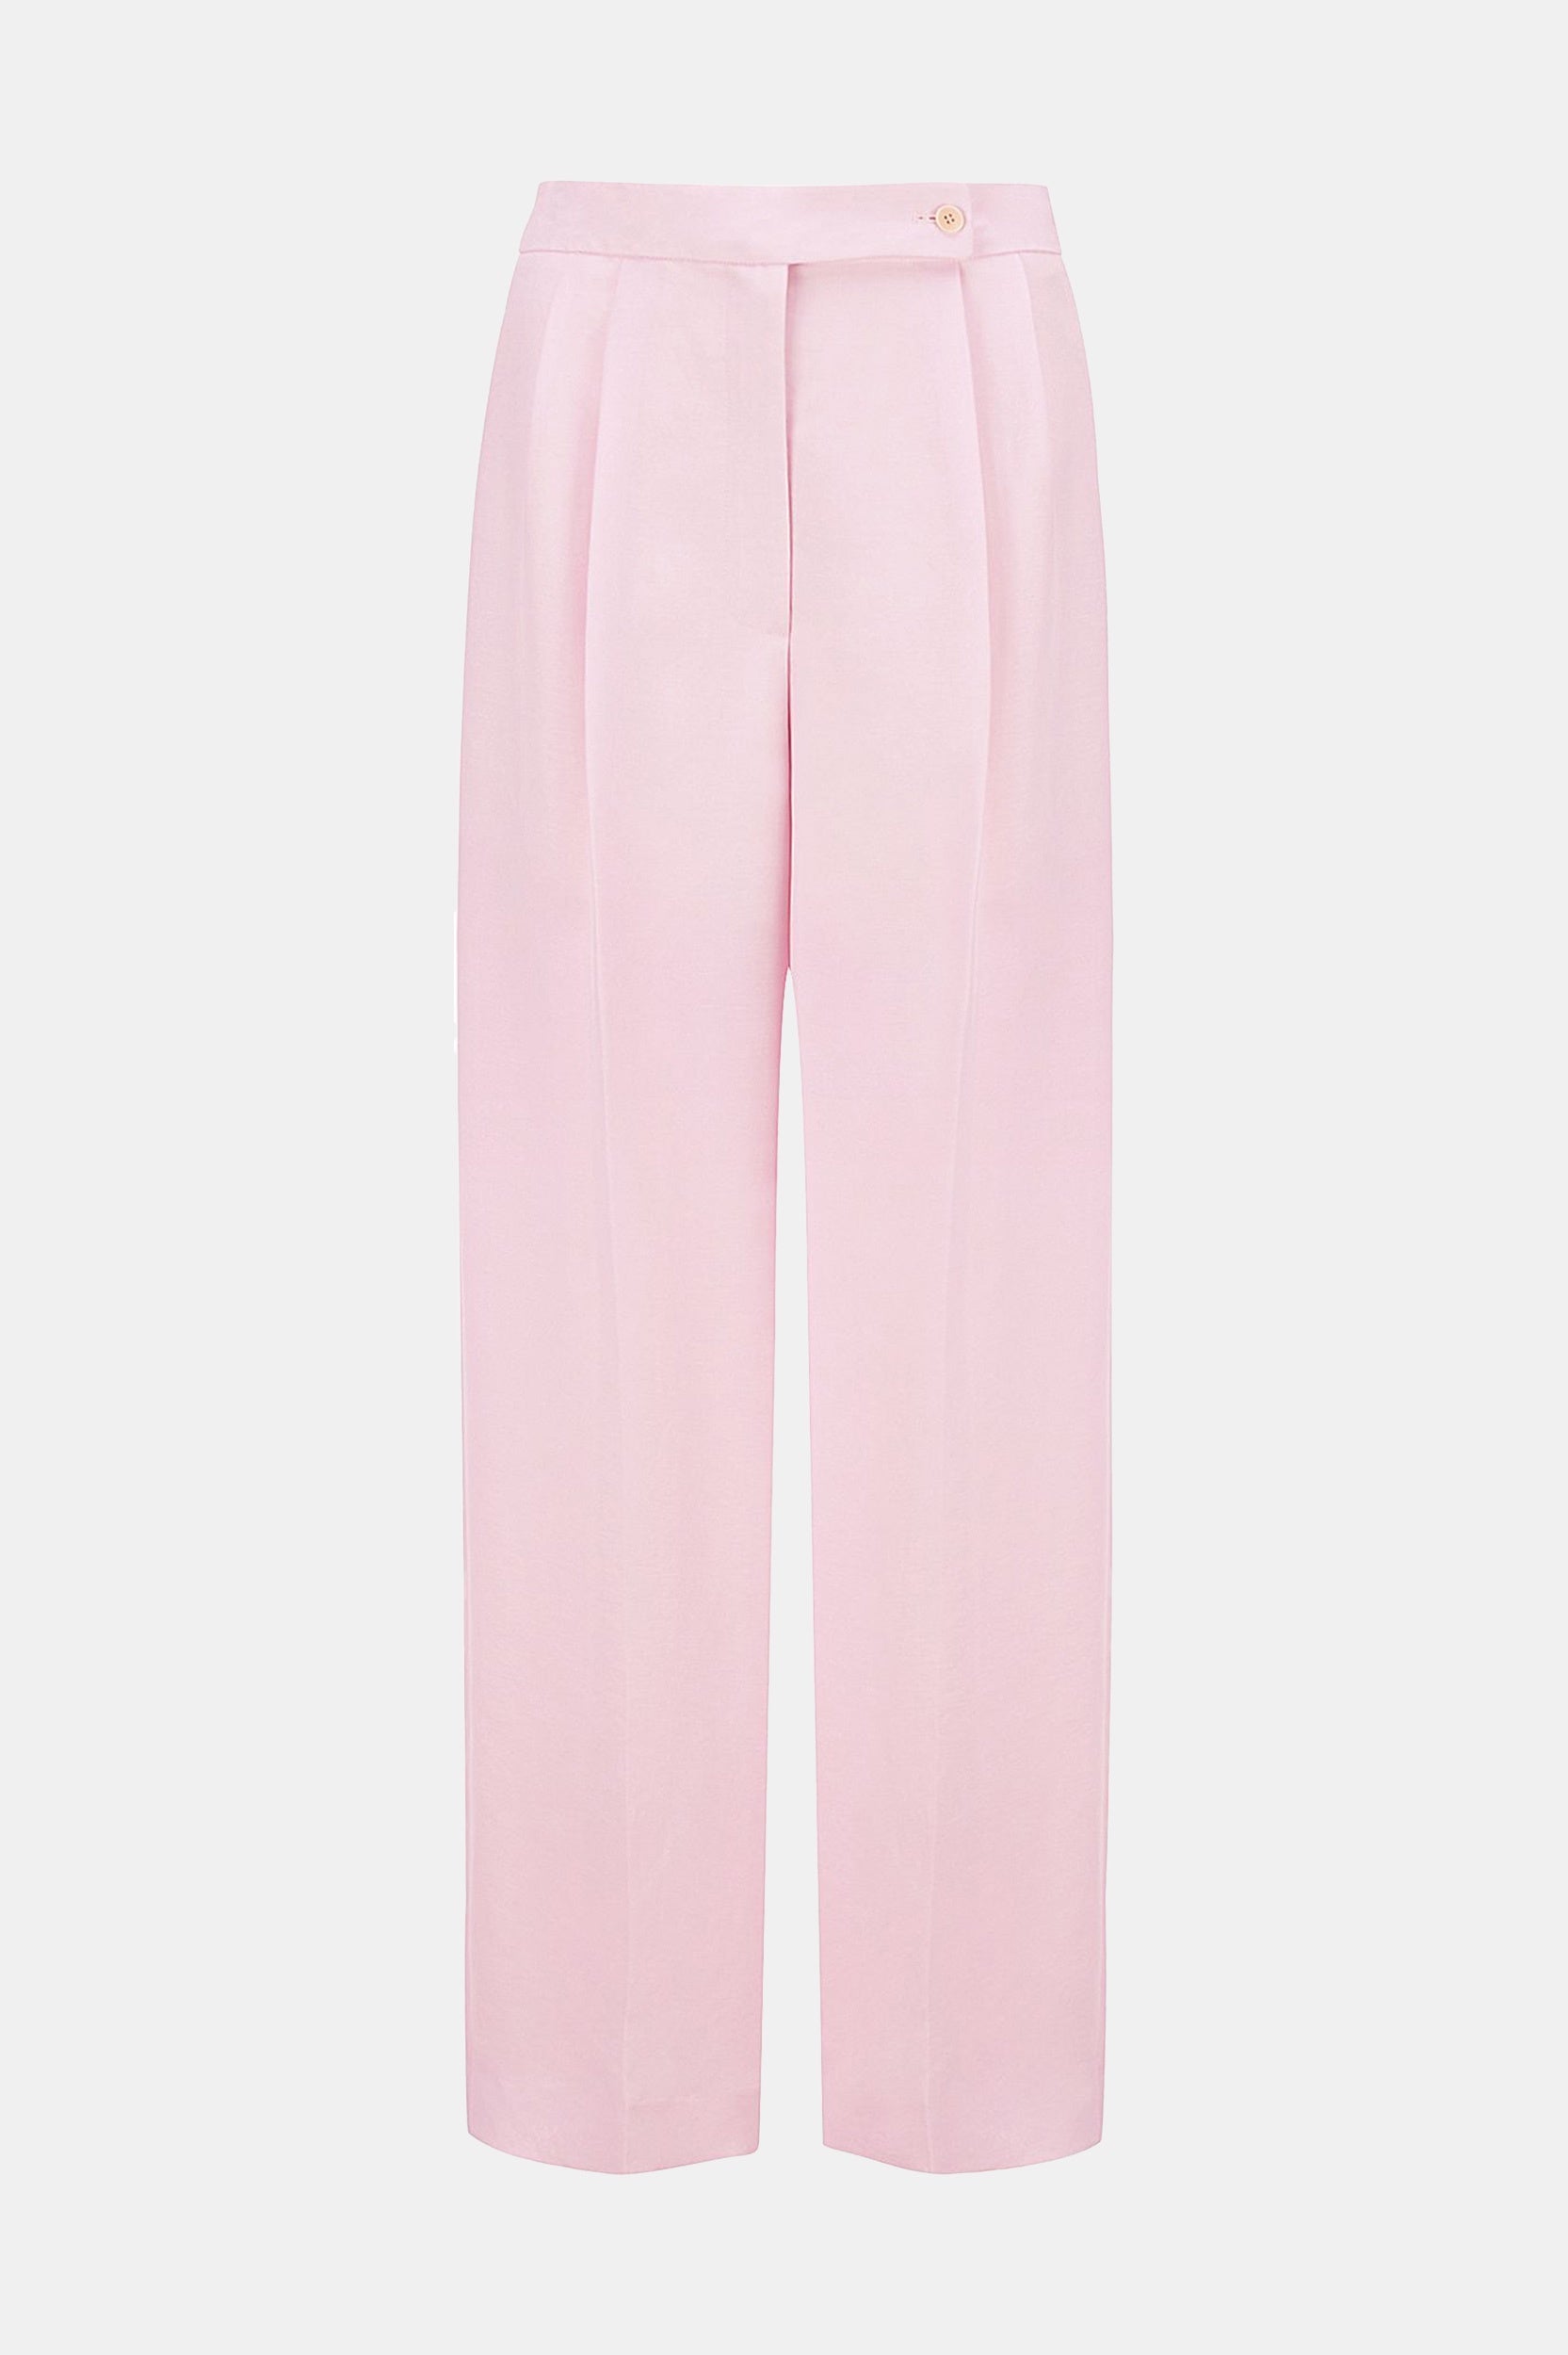 Linen Two Tuck Pants in Pink